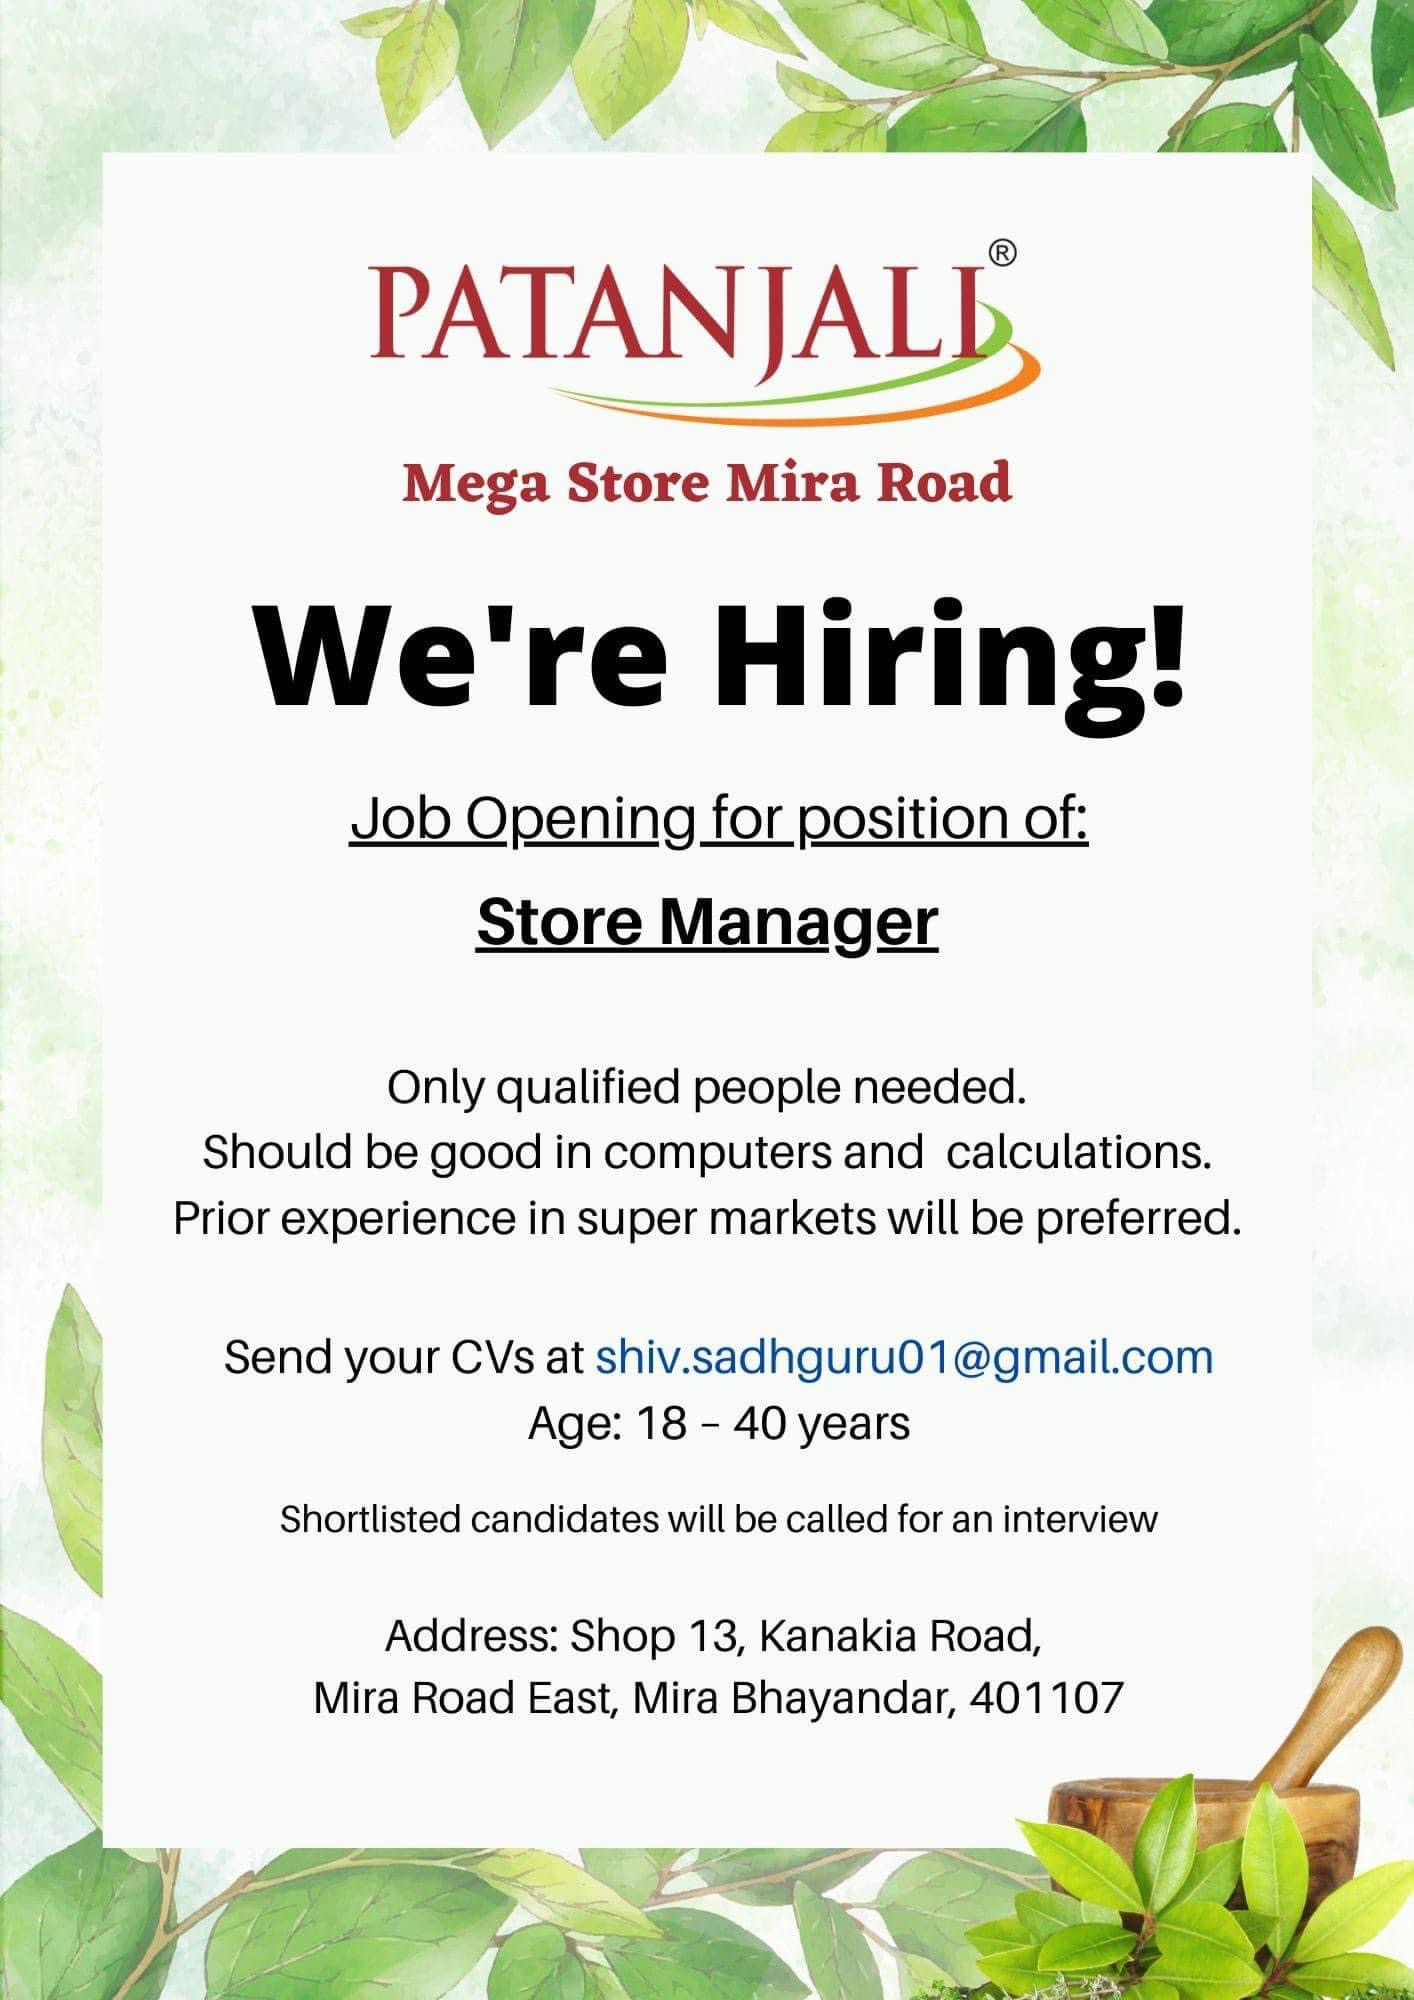 Patanjali Mega Store Mira Road has a job opening for the position of Store Manager.